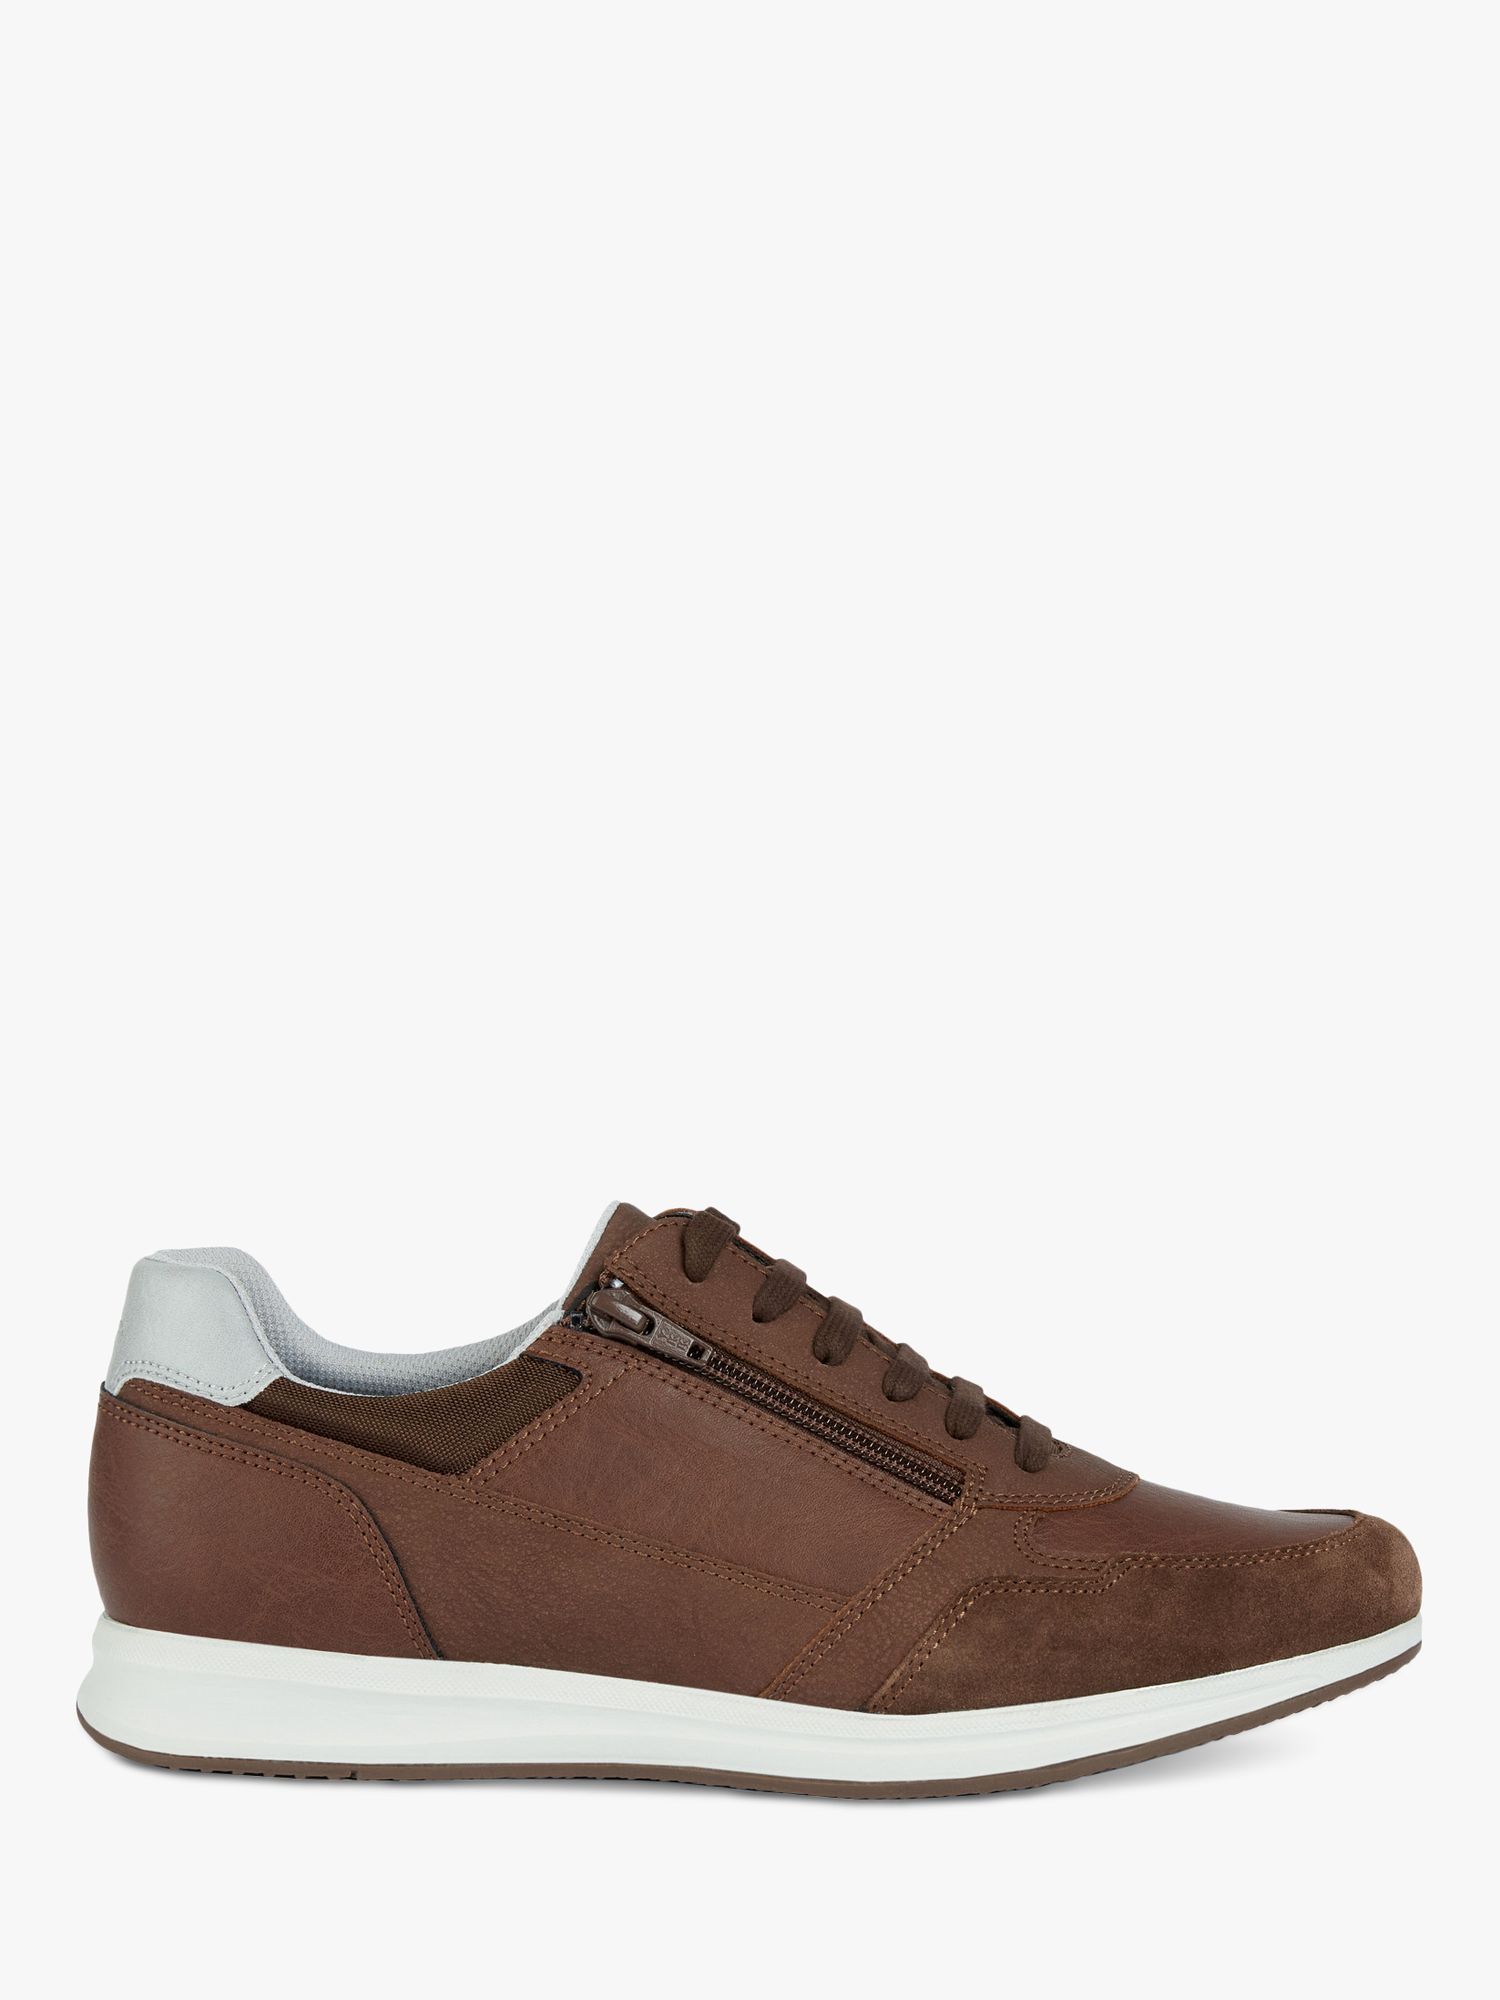 Geox Avery Casual Brown at John Partners